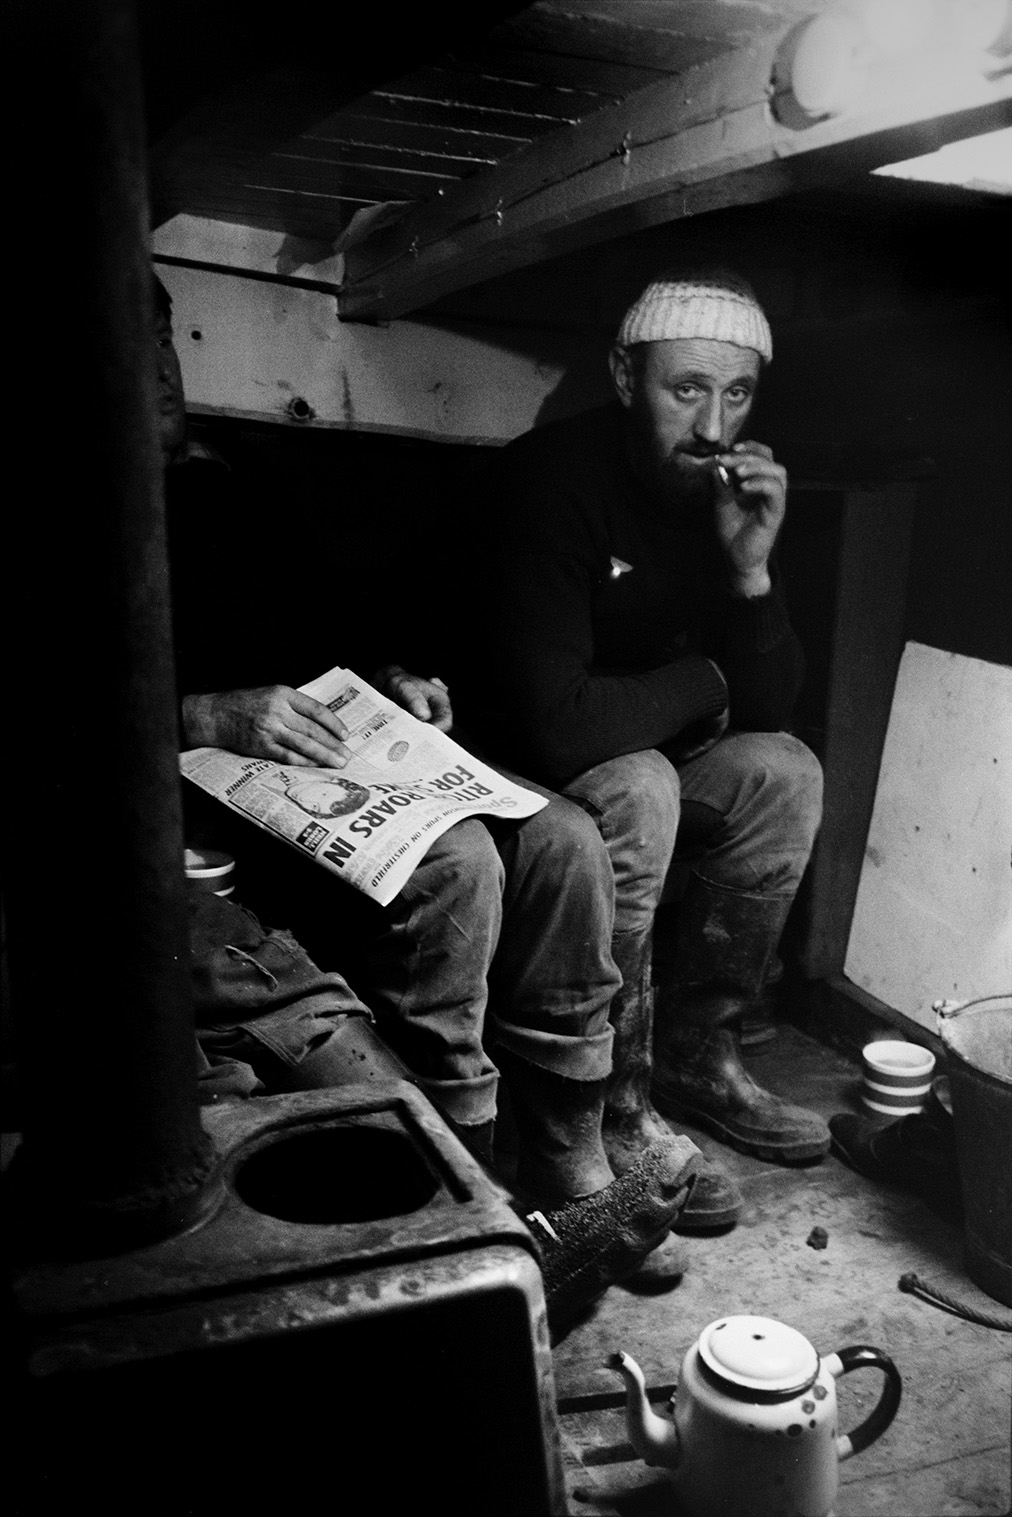 Men smoking and reading a newspaper inside a sand barge at Crow Point, Braunton. A teapot and mug can be seen on the floor.